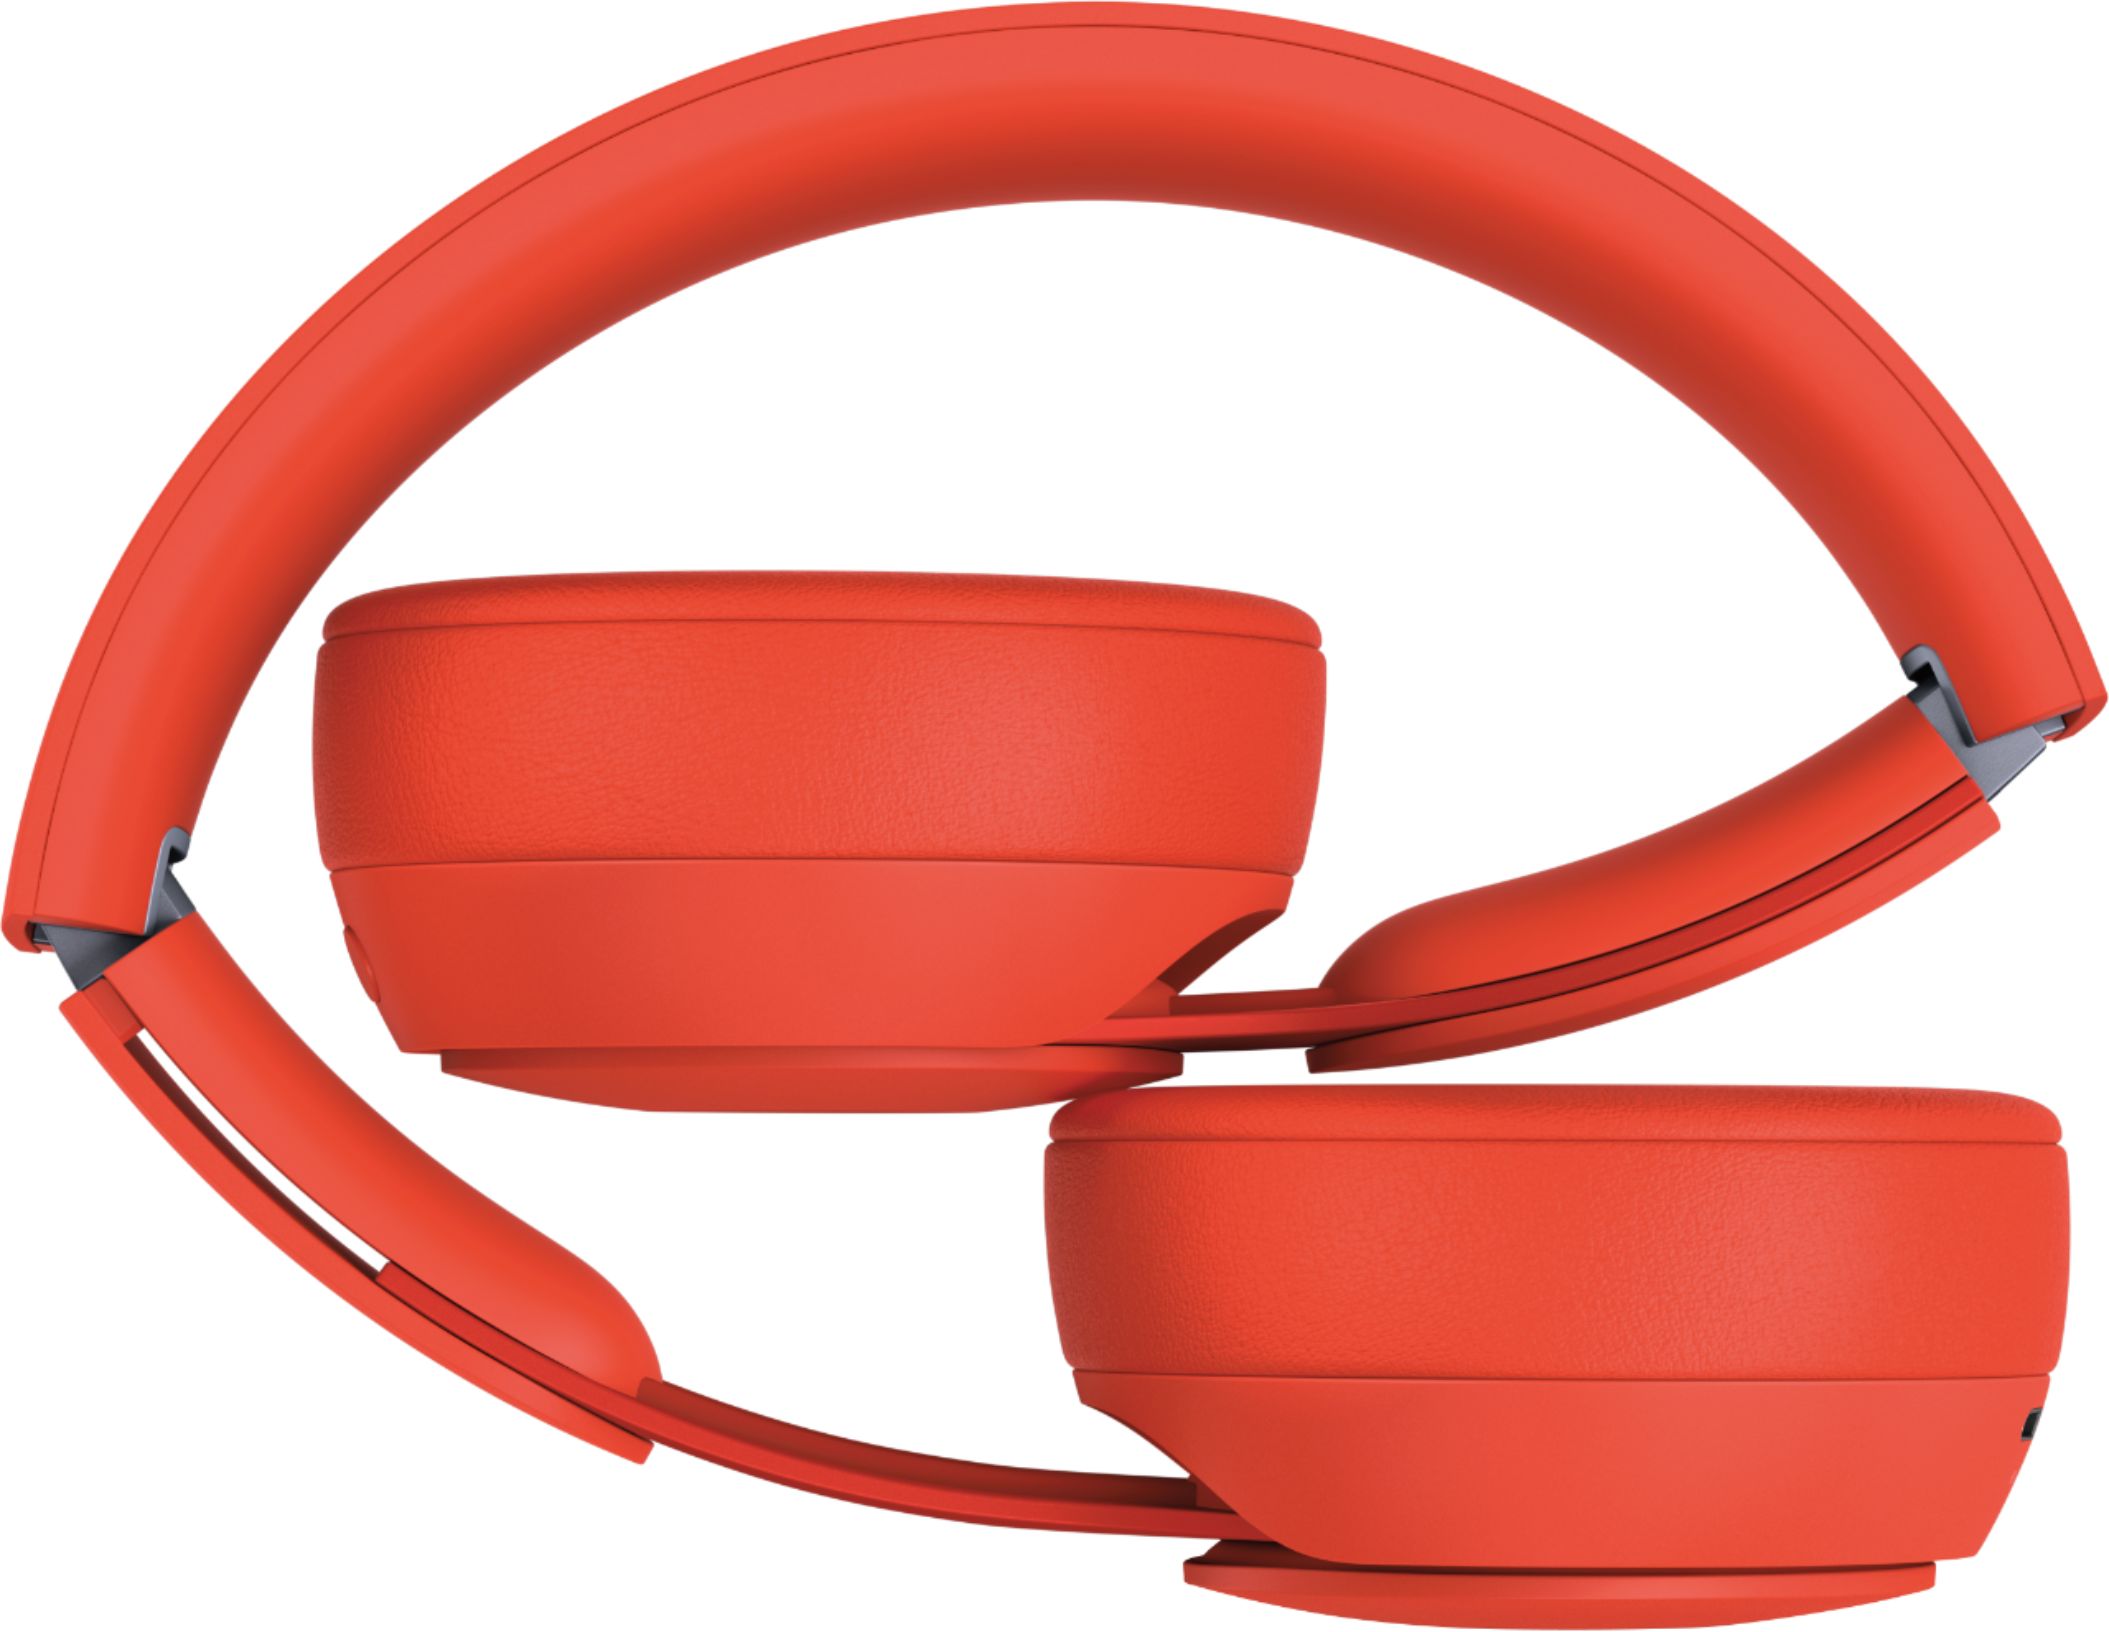 Beats by Dr. Dre Solo Pro More Matte Collection Wireless Noise Cancelling  On-Ear Headphones Red MRJC2LL/A - Best Buy